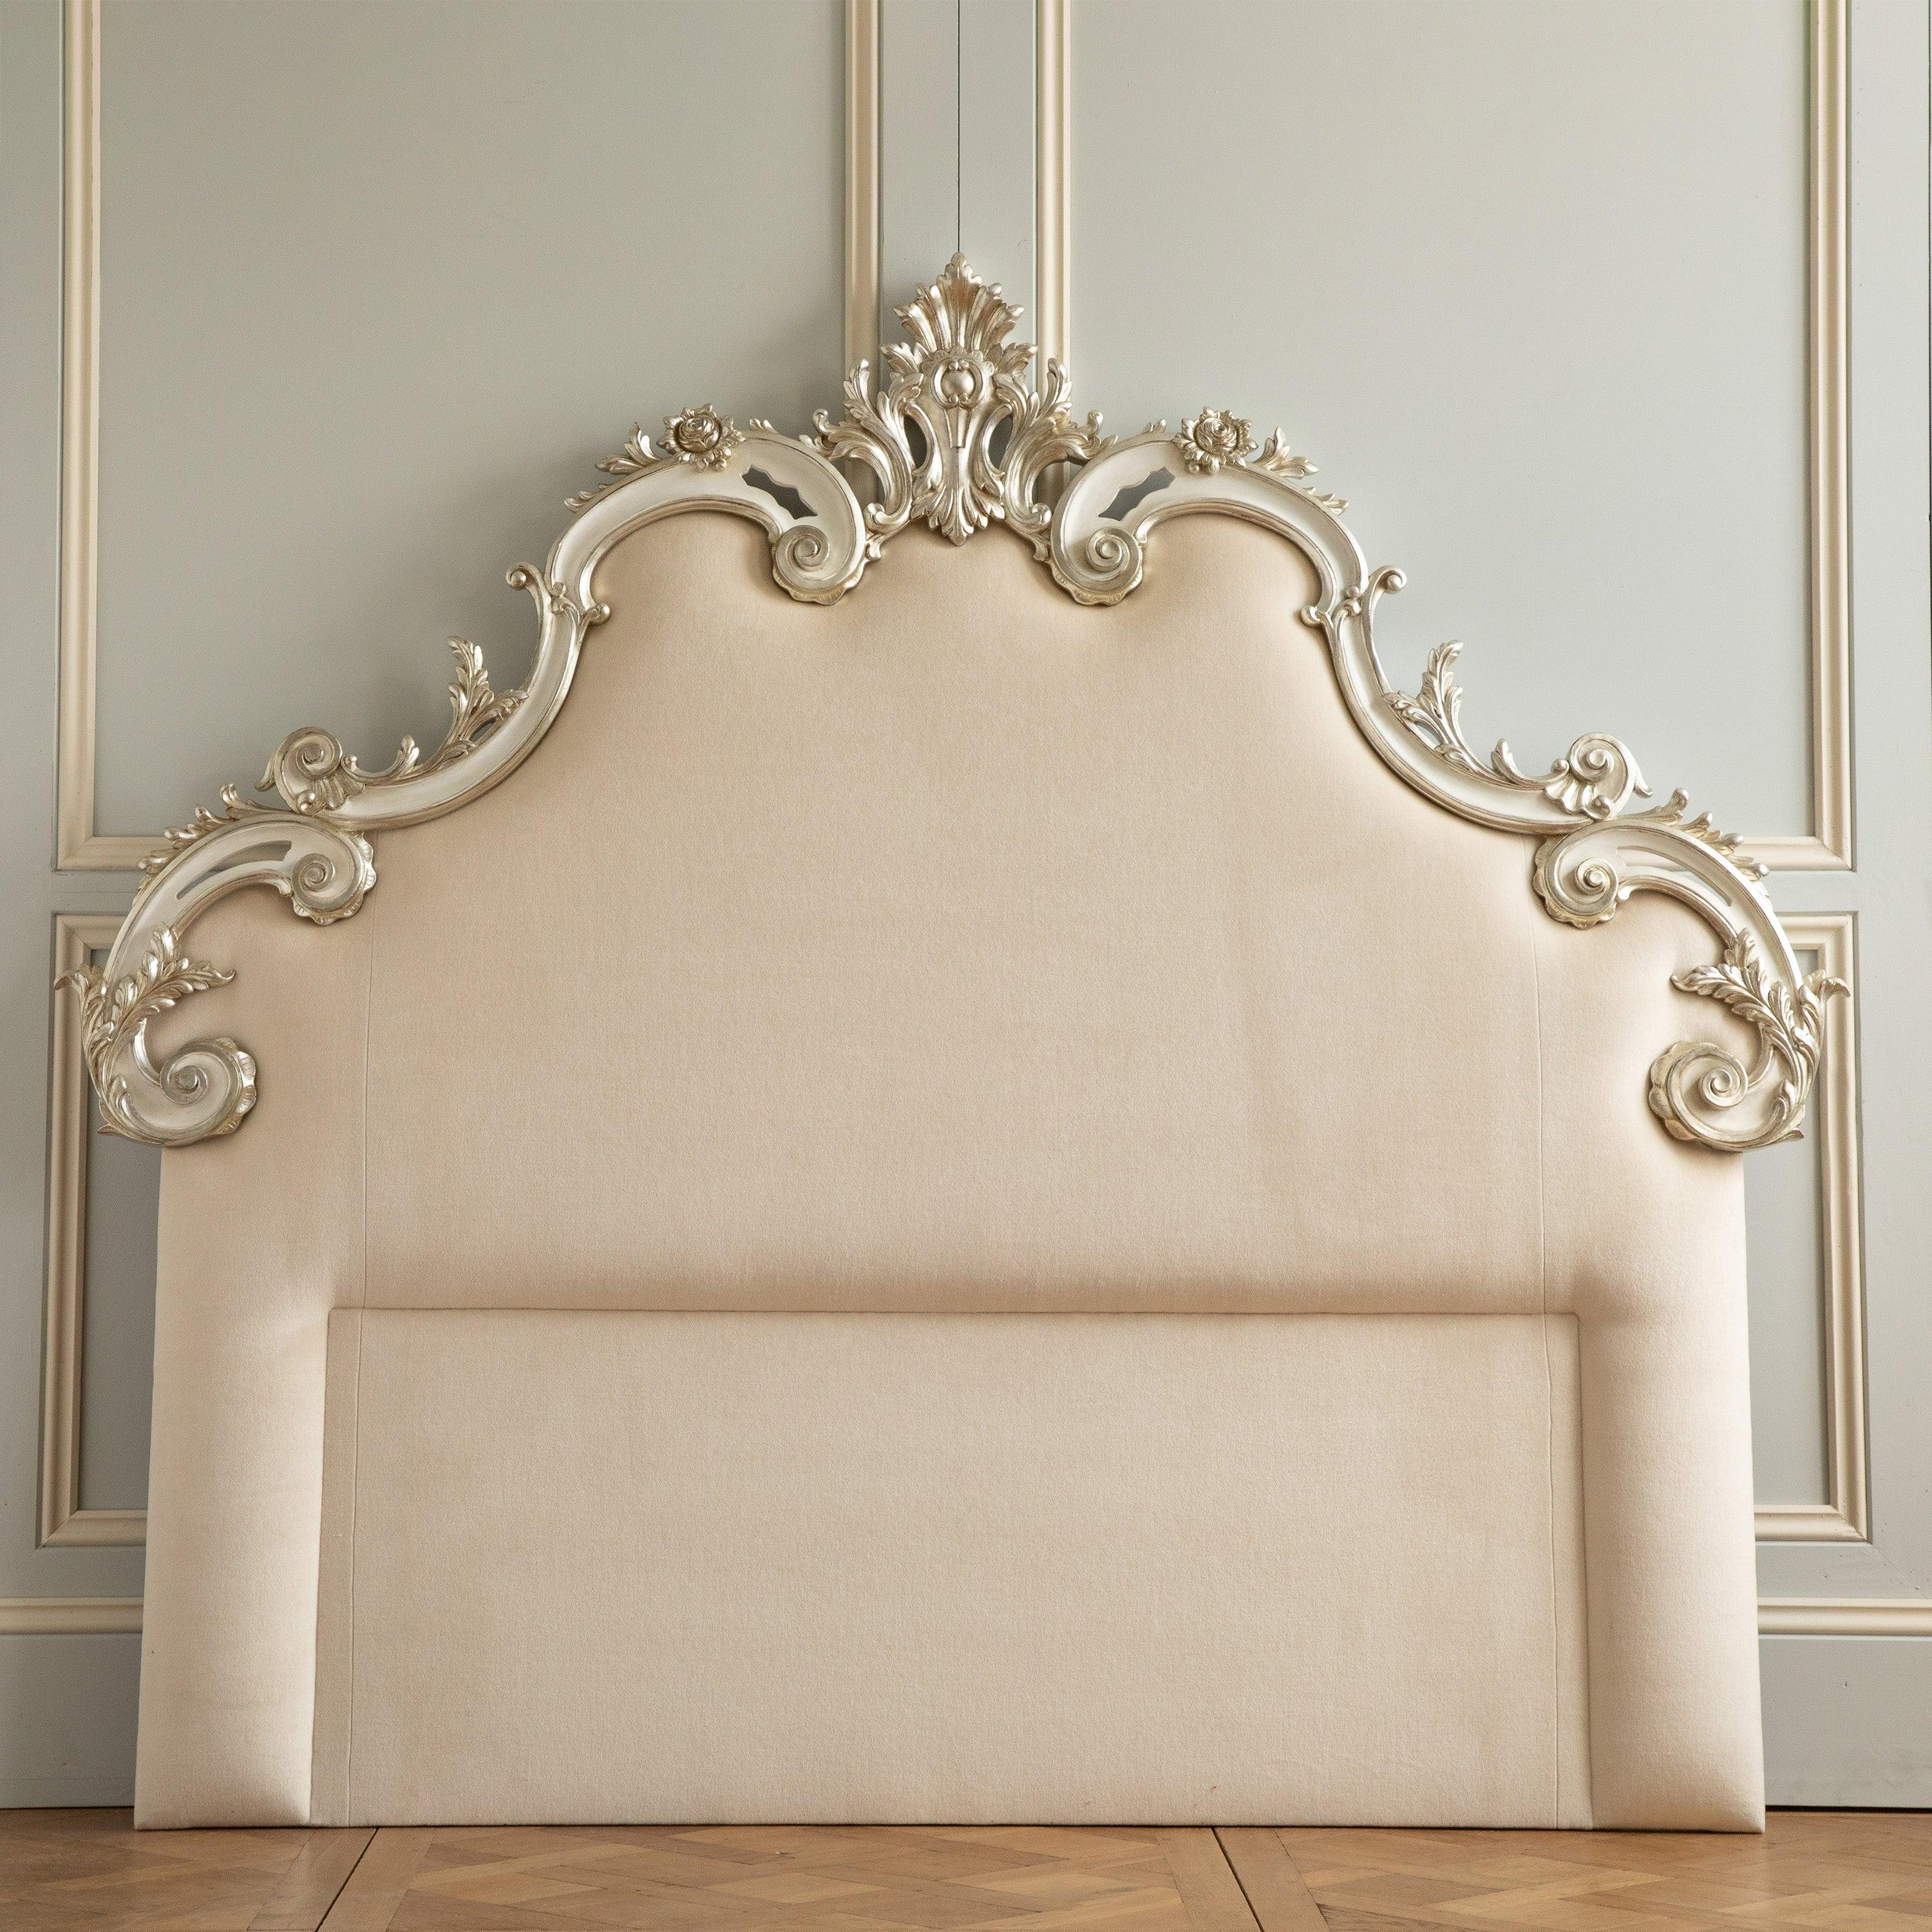 The 'Rococo Headboard', showcases the artistry of our hand-carved designs. It has been made to accommodate multiple mattress sizes, including the larger dimensions of both a UK - Super King and US- King size. 
The intricate carving consists of deep